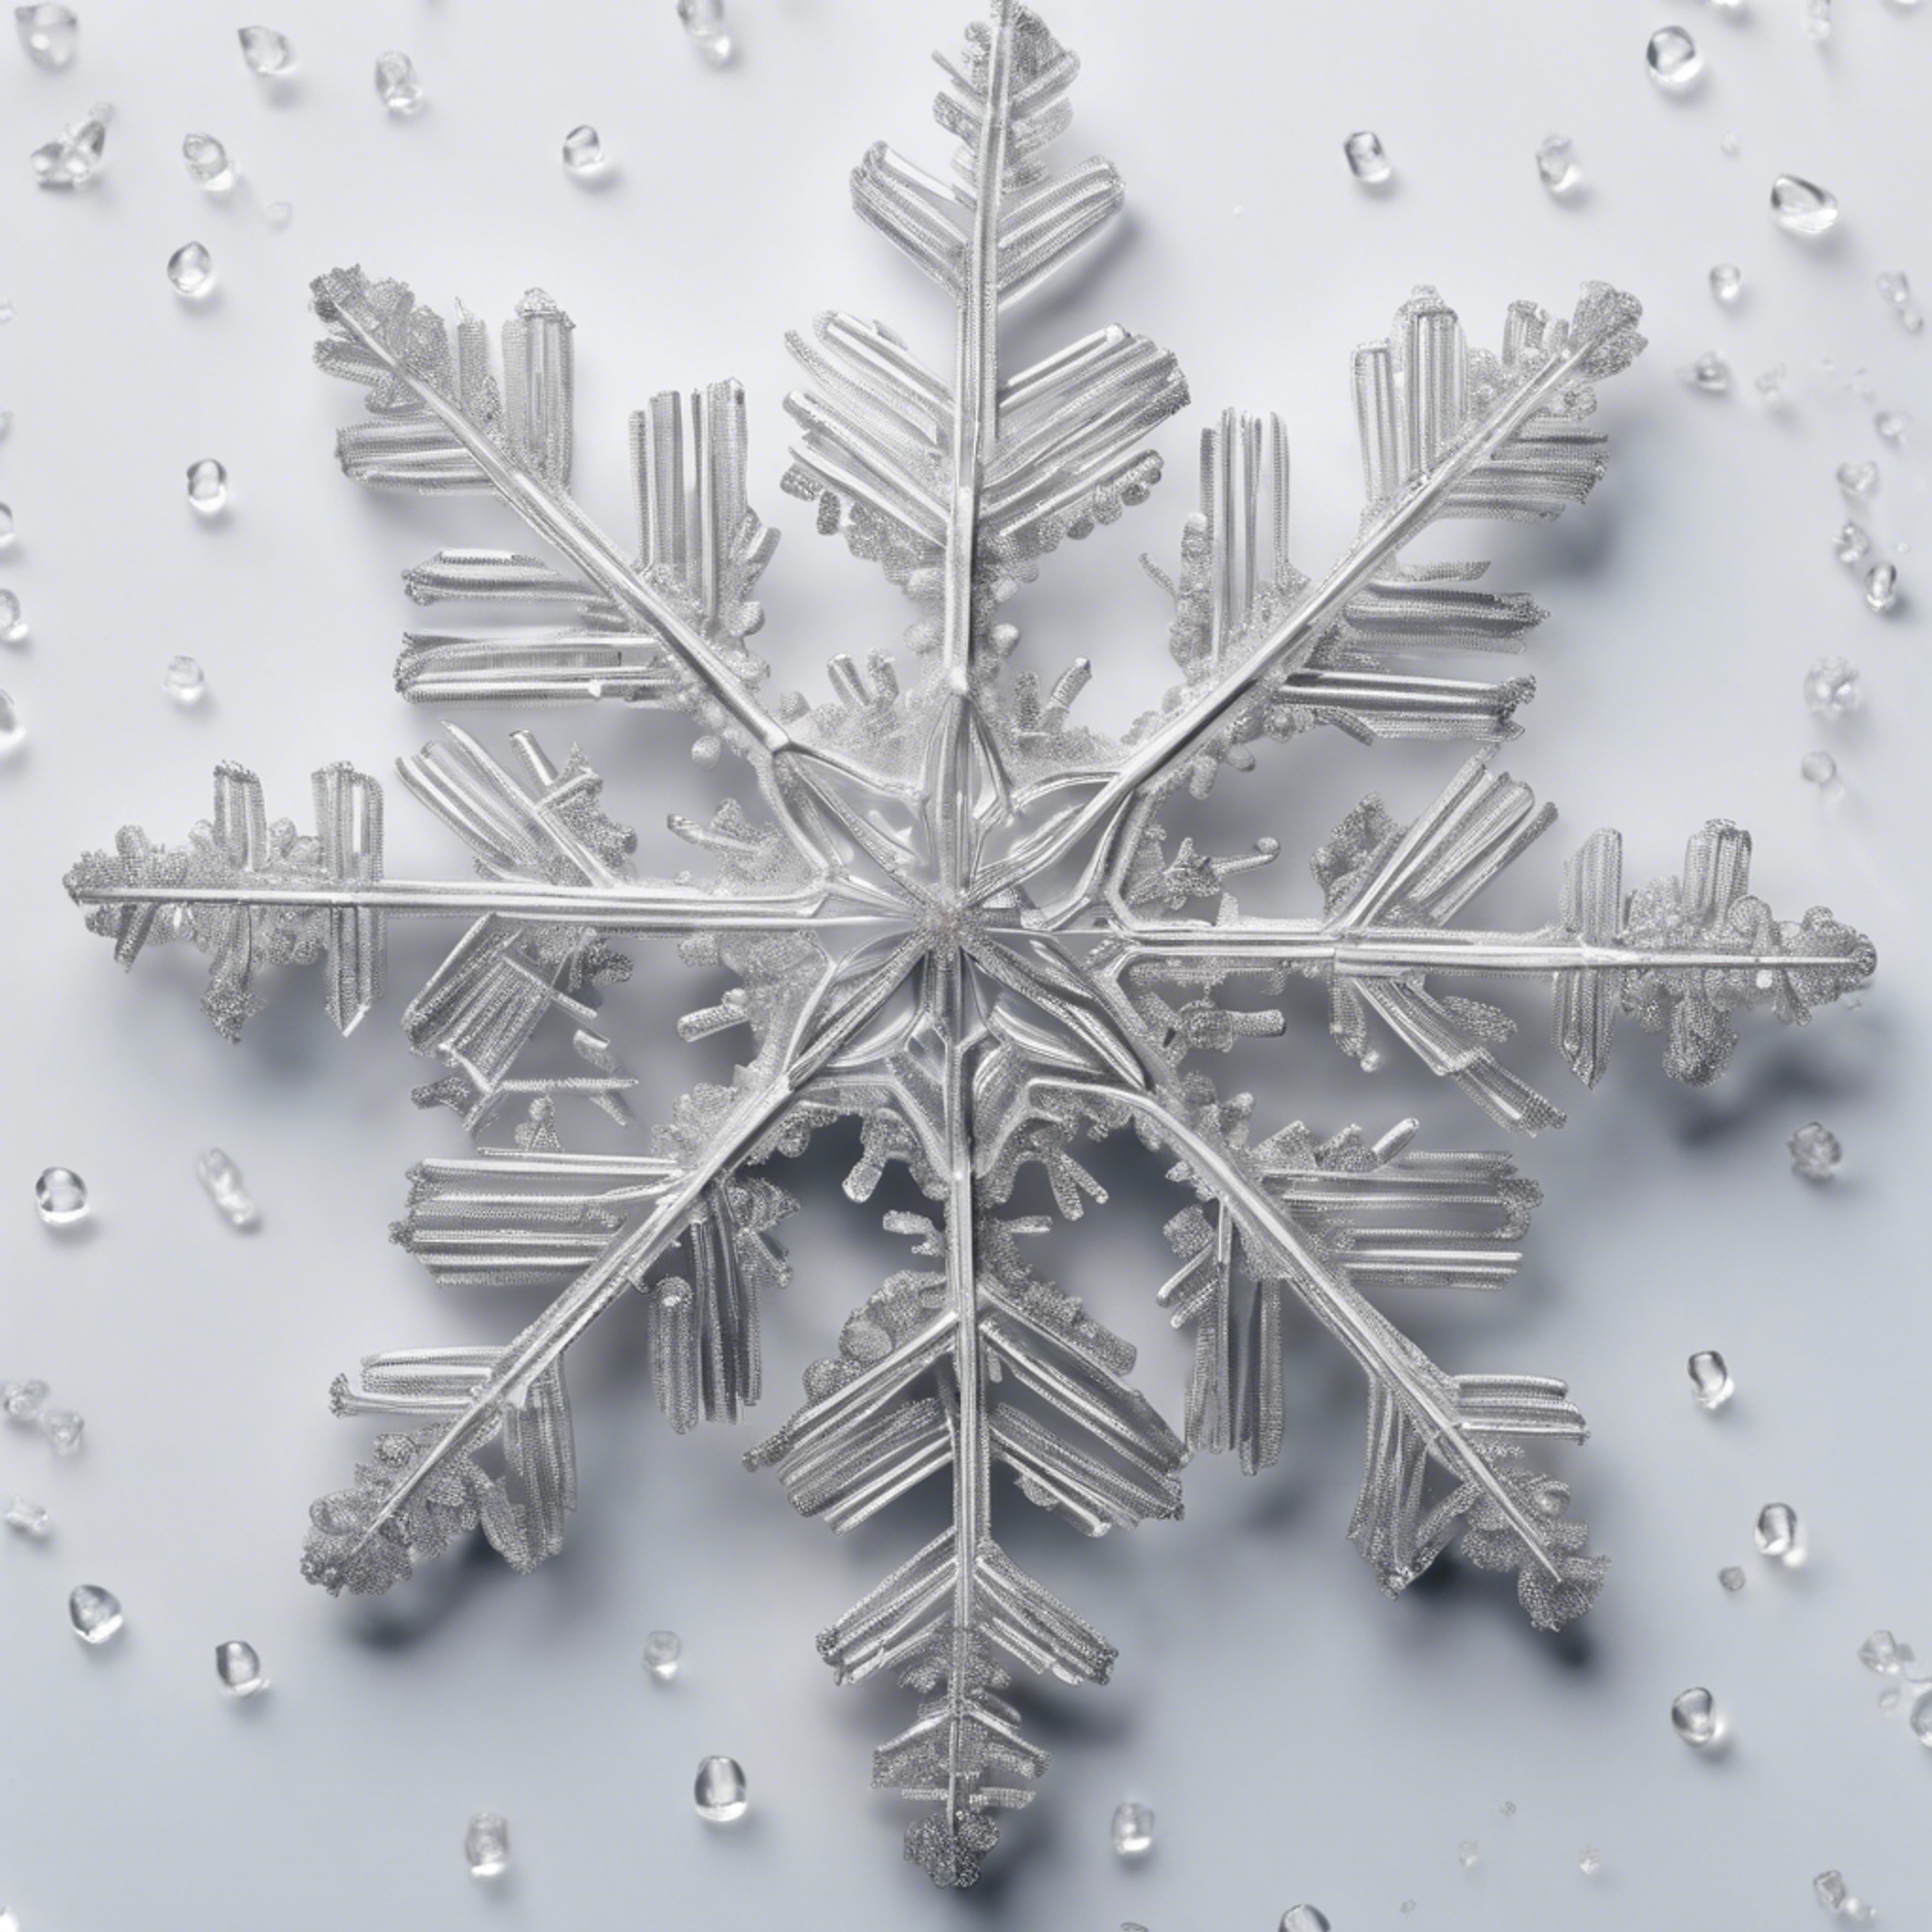 Close-up macro photography of a silver-white snowflake, intricate in detail, against a cool white background. Дэлгэцийн зураг[e4635791b5a244959ce4]